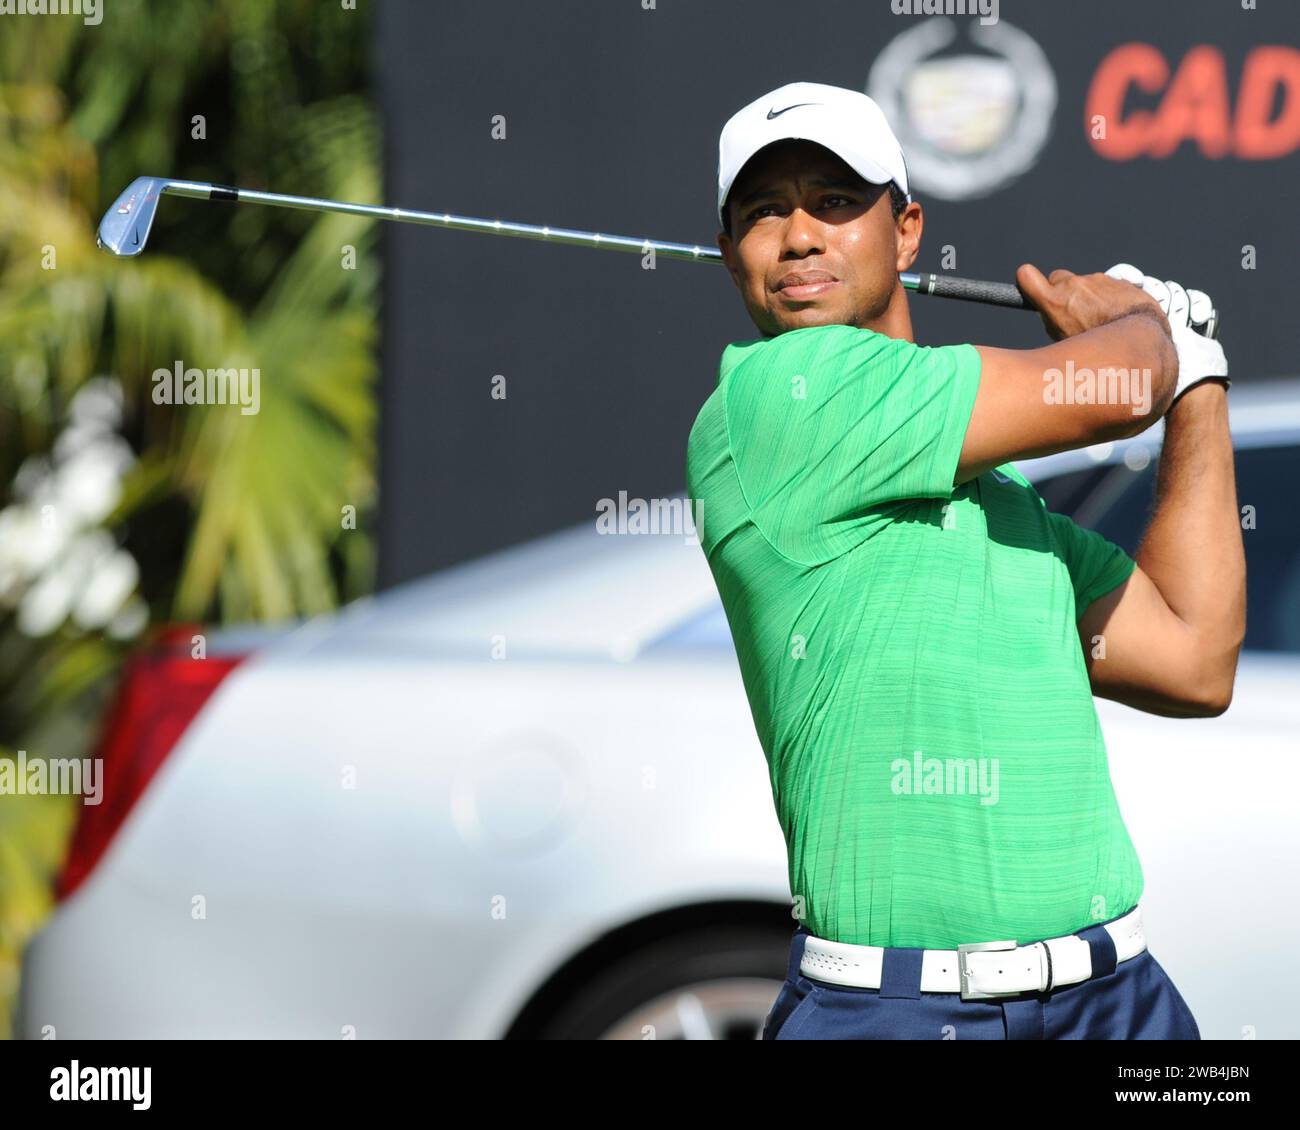 **FILE PHOTO** Tiger Woods and Nike End 27 Year Partnership. MIAMI, FL - MARCH 10: Tiger Woods plays during the third round of the World Golf Championship's Cadillac Championship at Doral Golf Resort And Spa on March 10, 2012 in Miami, Florida. Credit: mpi04/MediaPunch Stock Photo